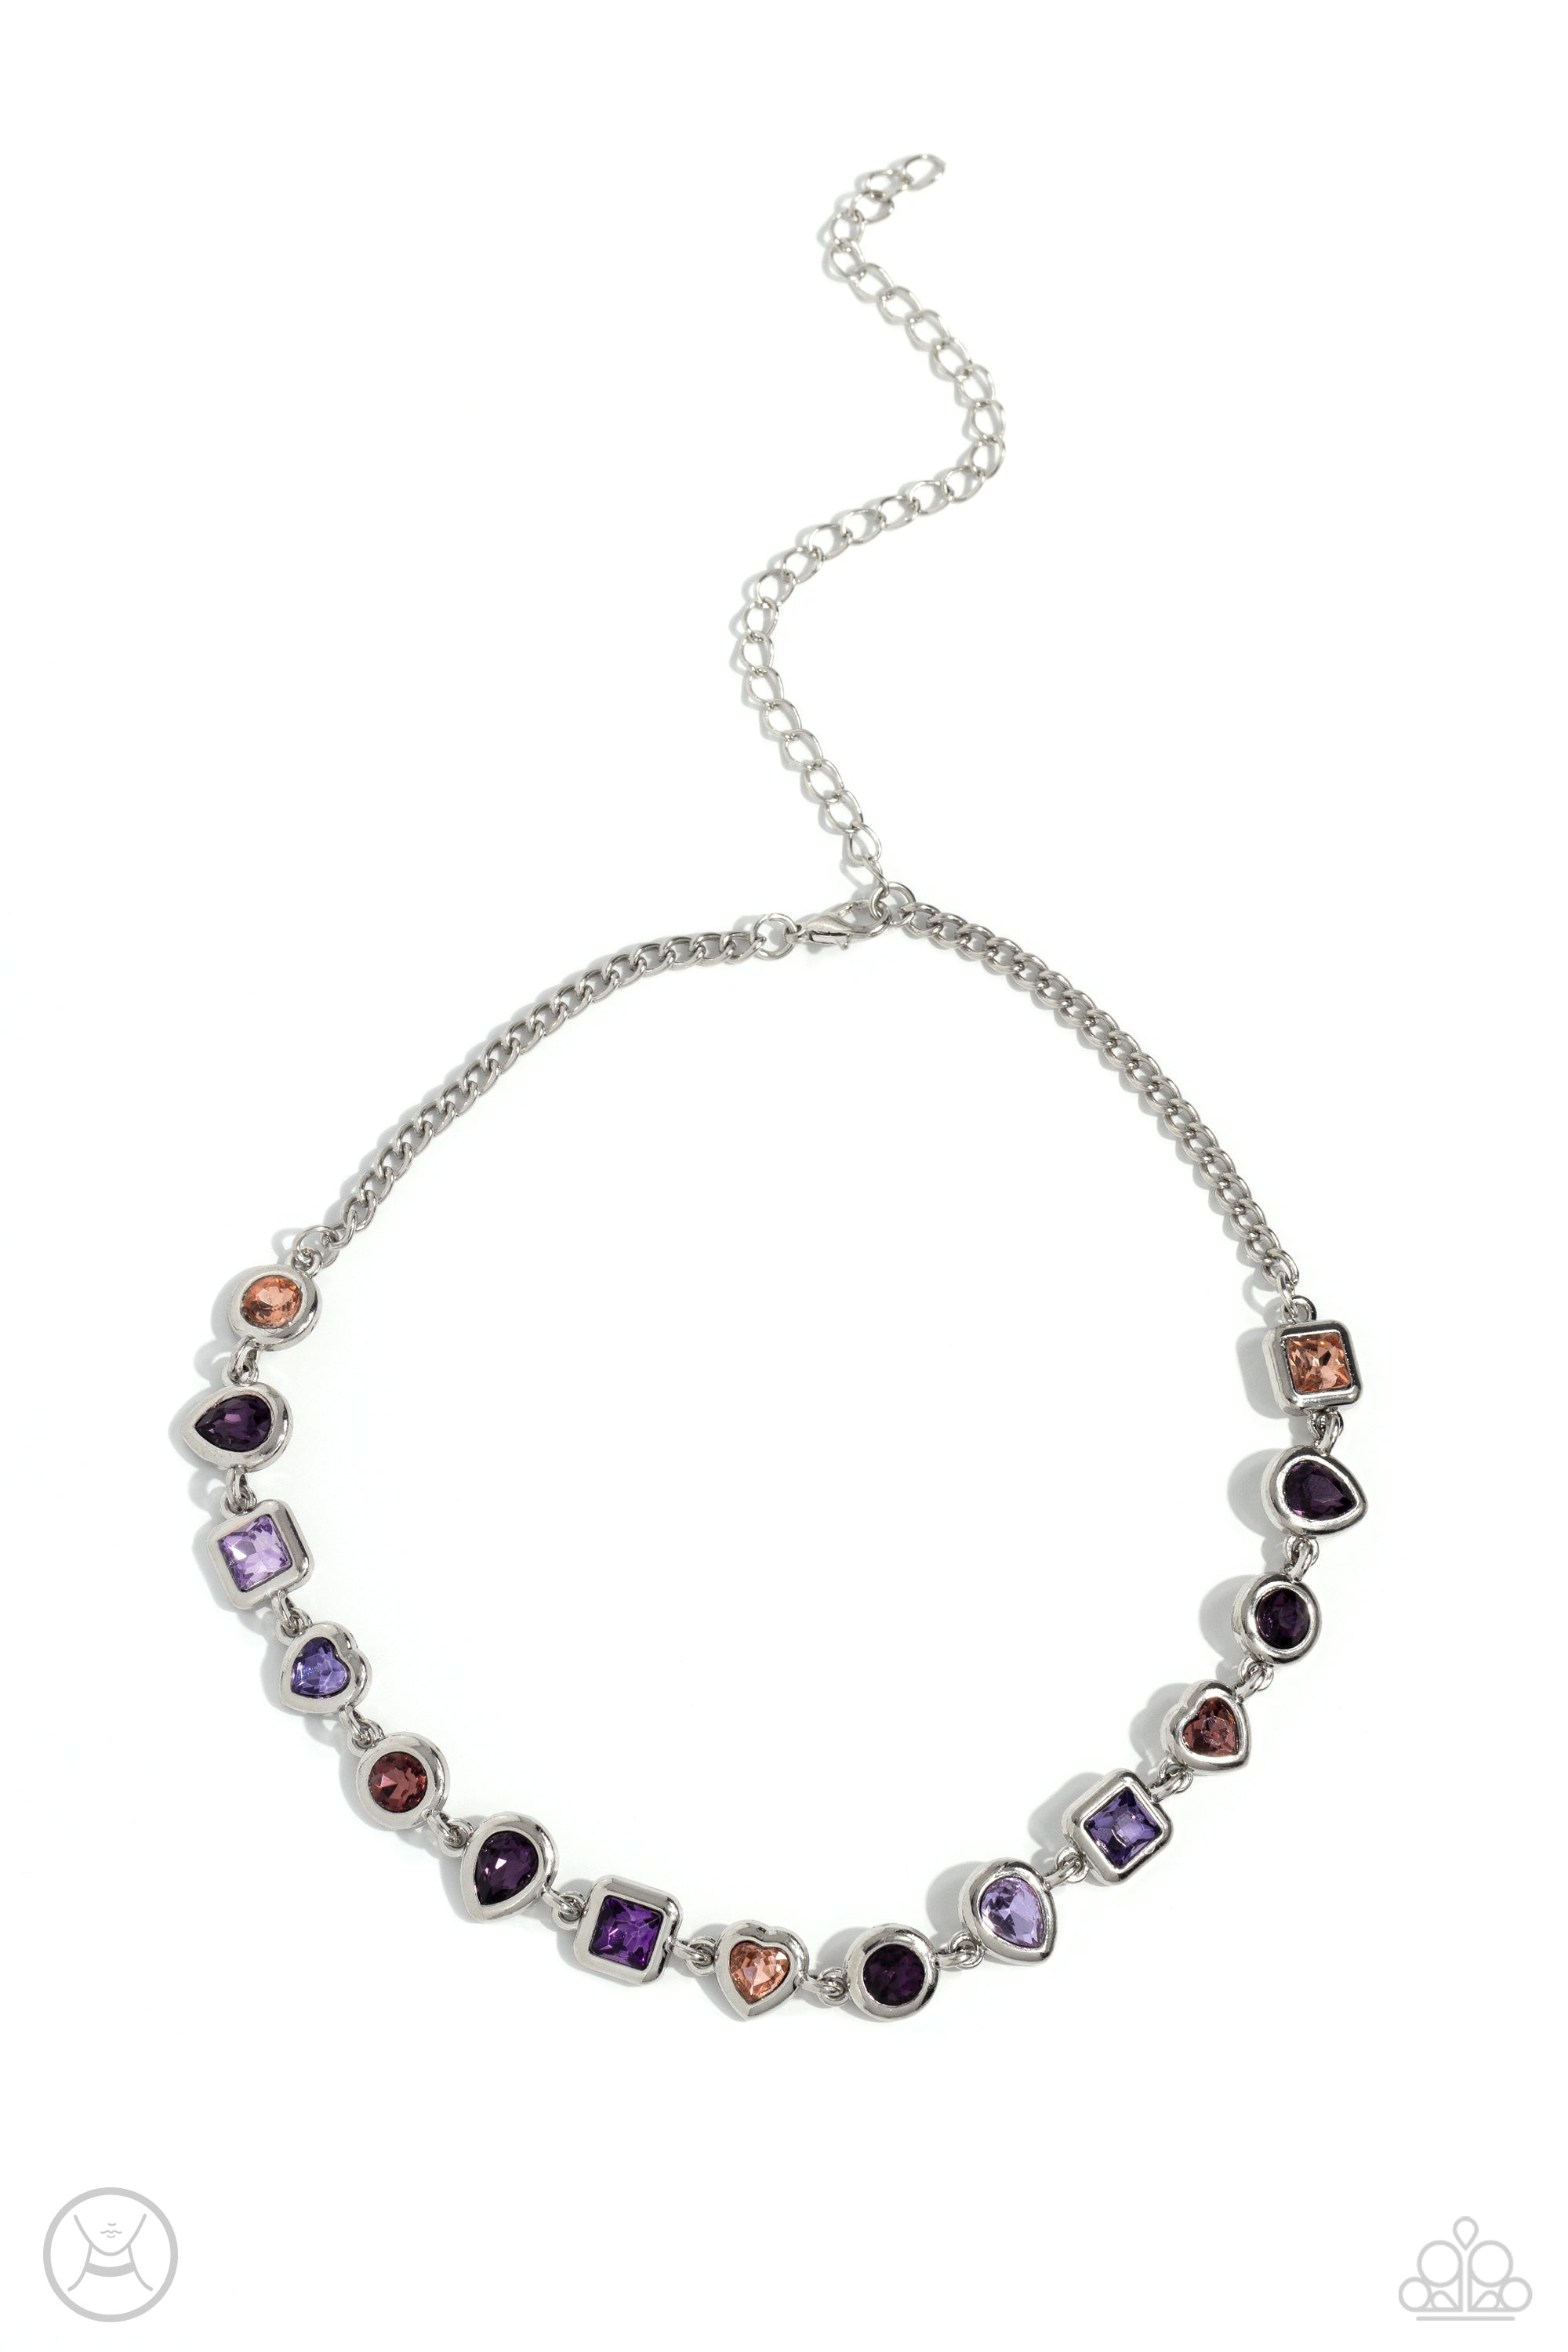 ABSTRACT ADMIRER PURPLE-NECKLACE